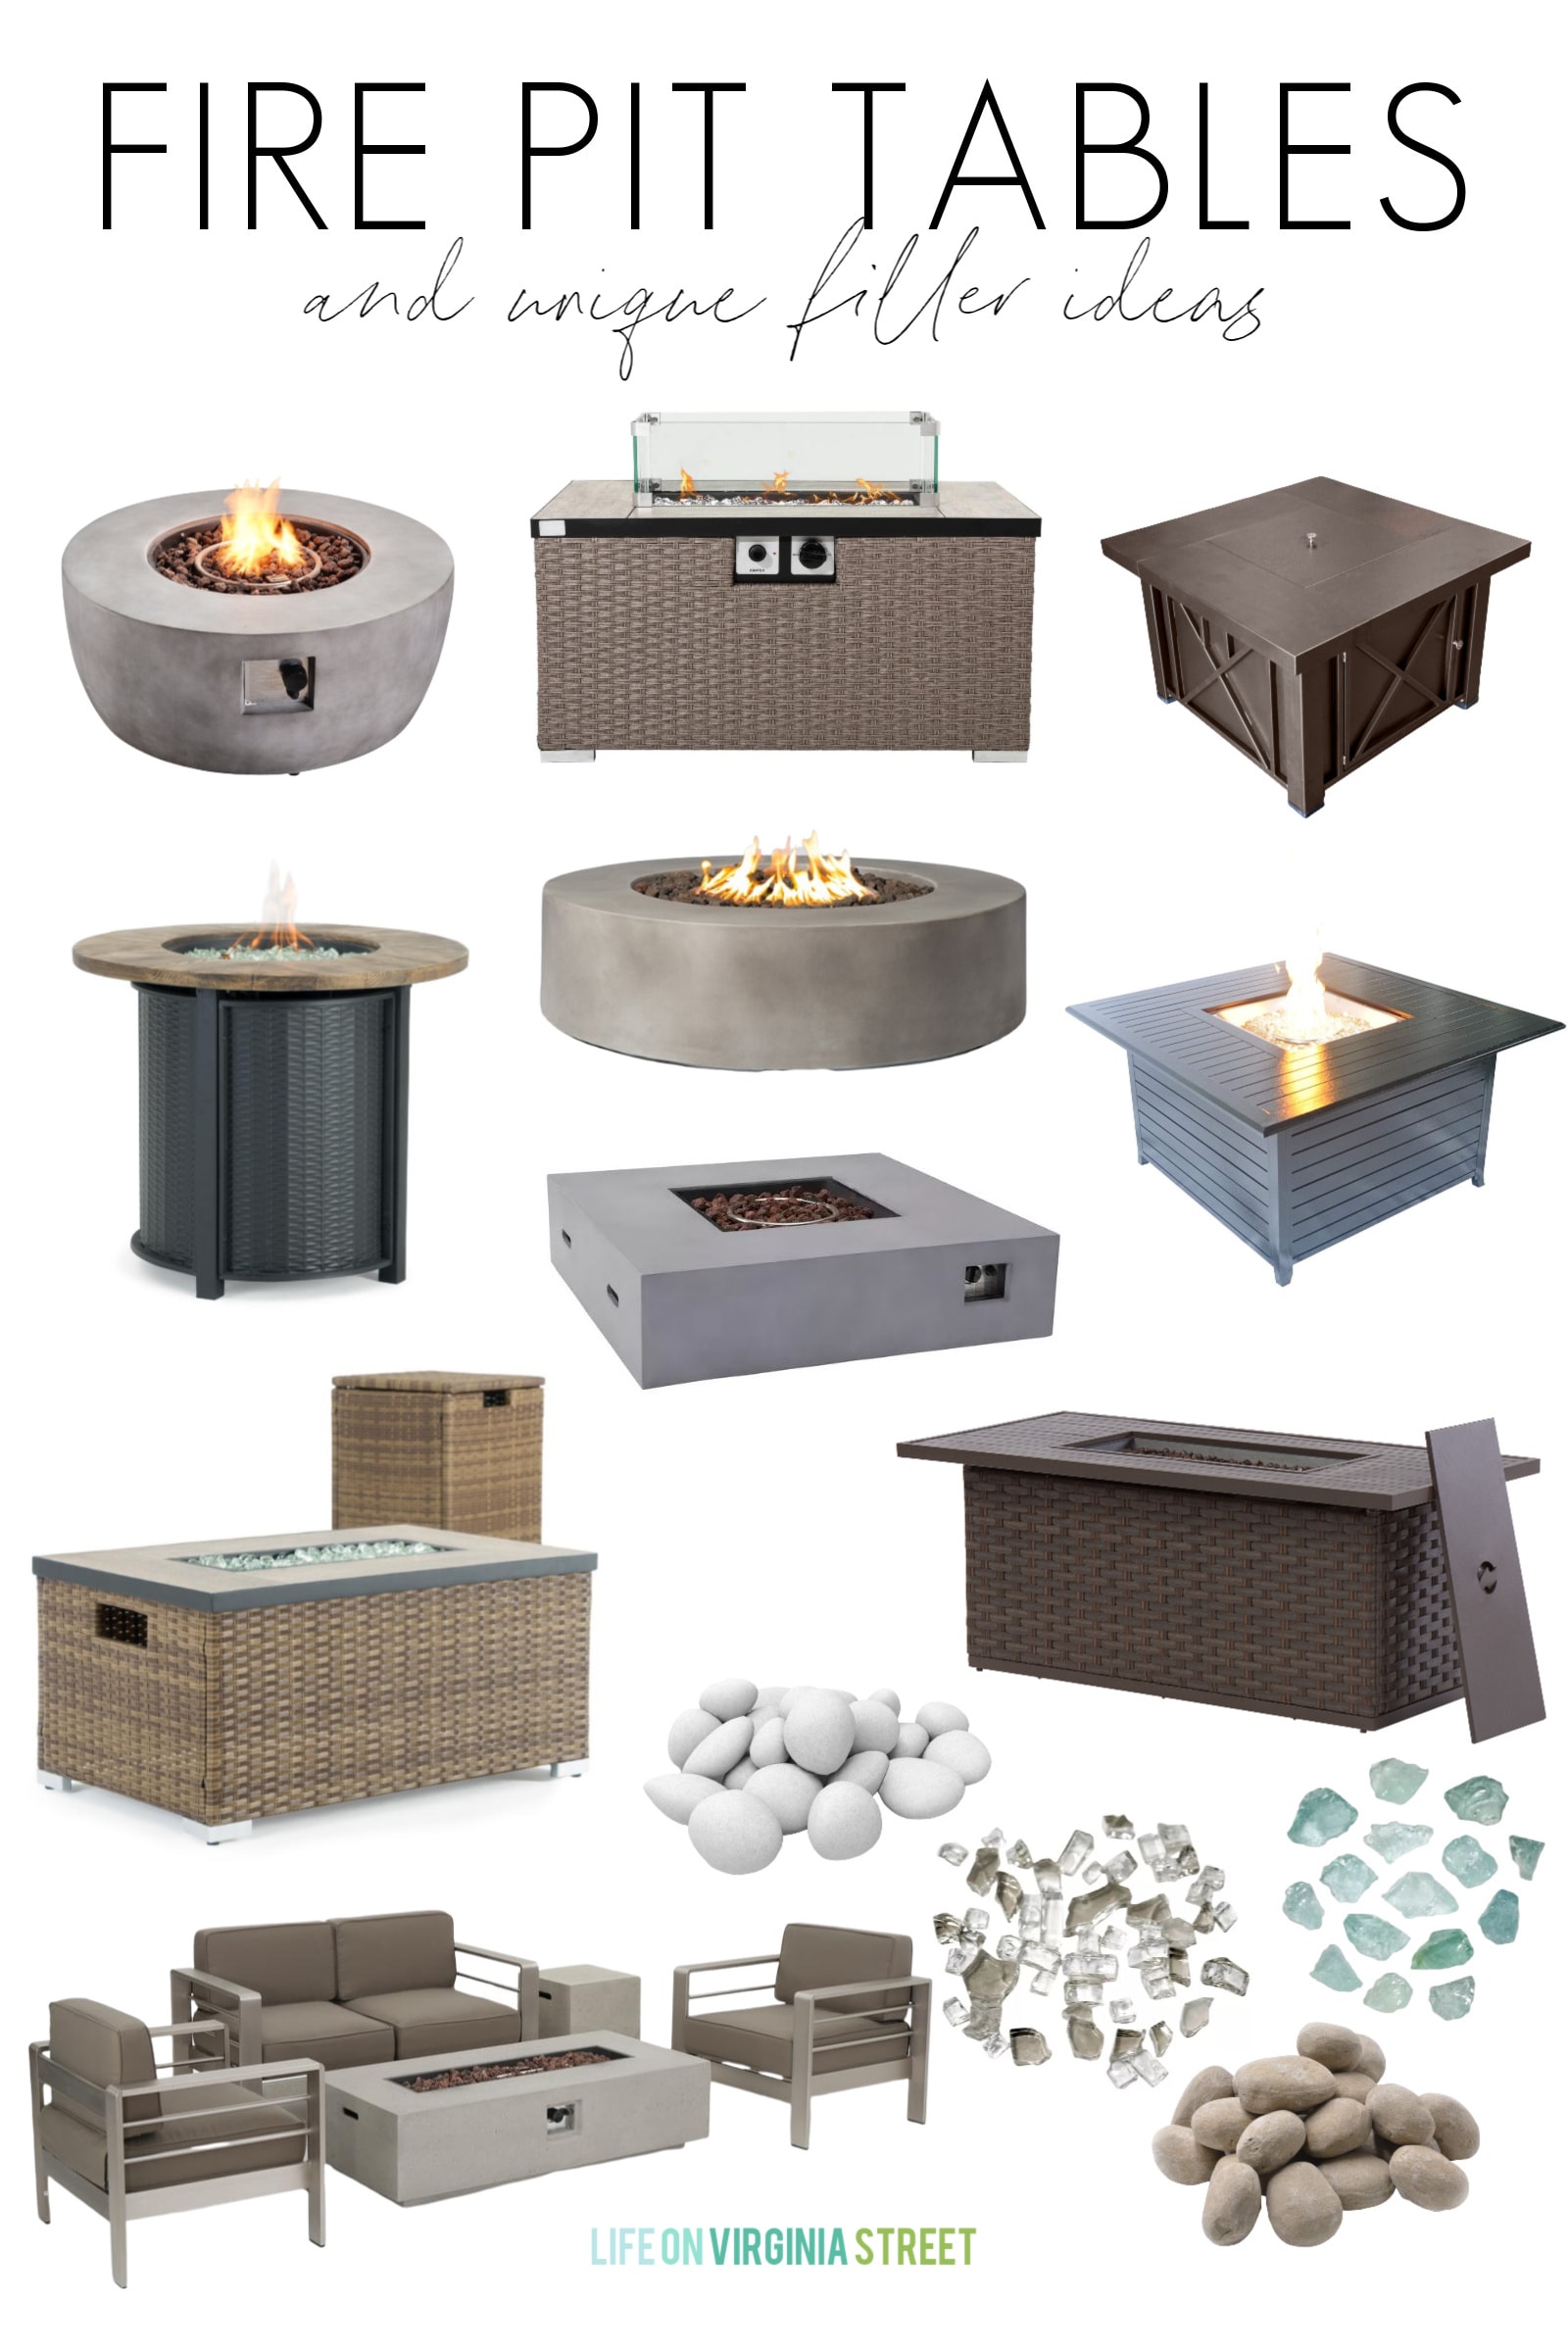 Fire Pit Tables Filler Ideas Life, Used Fire Pit Table